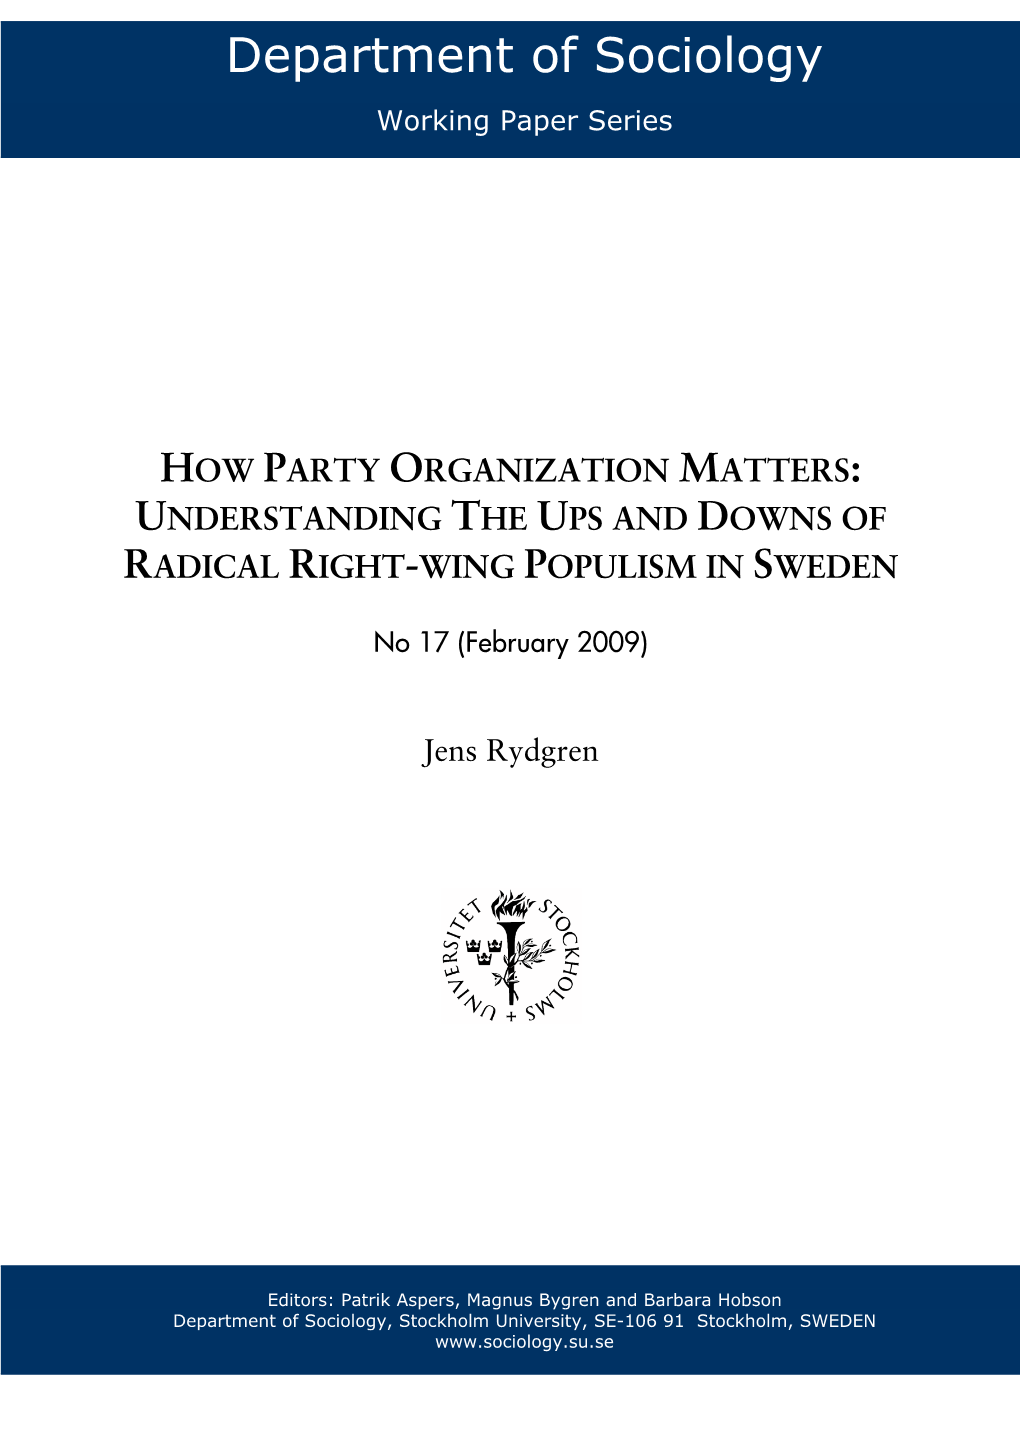 Understanding the Ups and Downs of Radical Right-Wing Populism